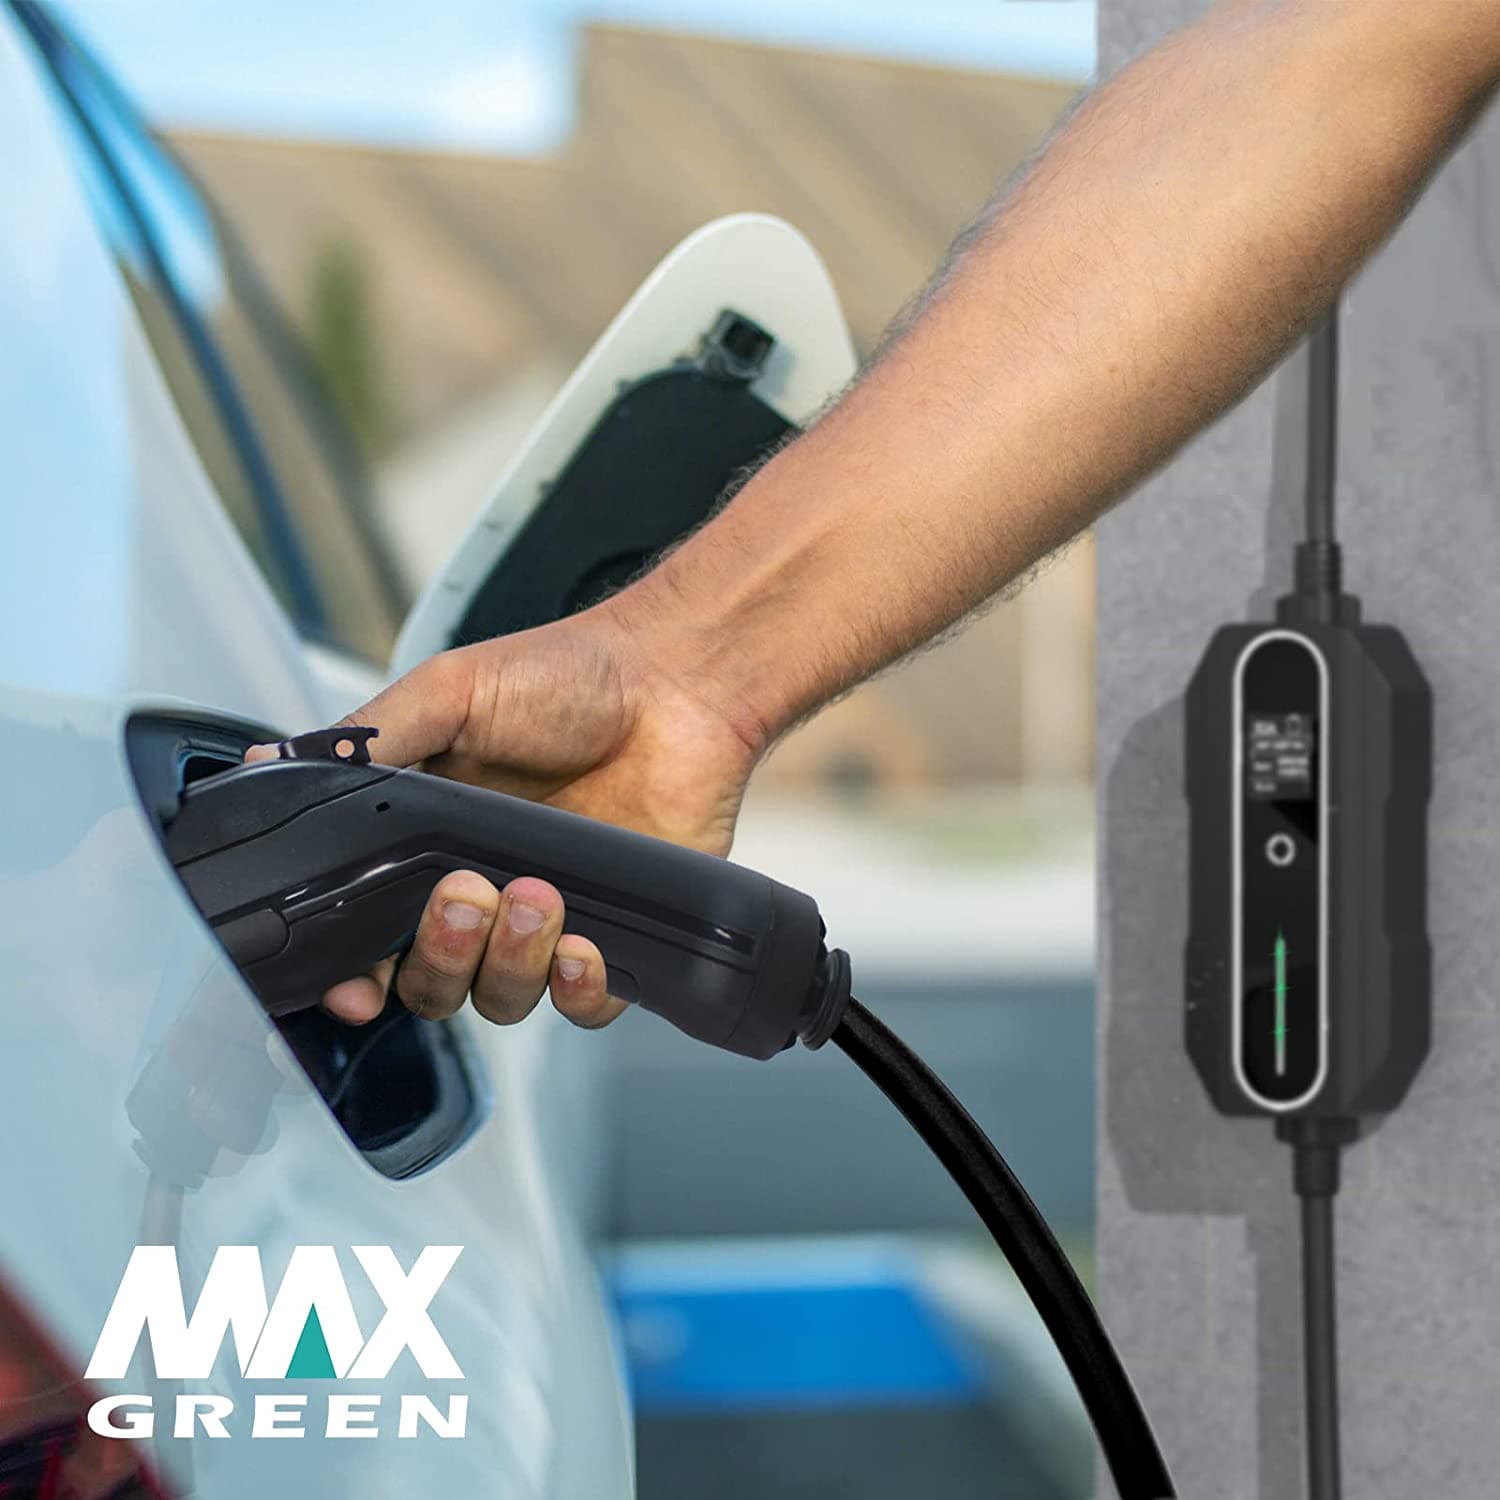 MAX GREEN Speeder Level 2 EV Charger, Adjustable Current (10A/16A/20A/24A/32A) Portable EVSE, 240V 25ft NEMA 14-50 Electric Vehicle Charging Station